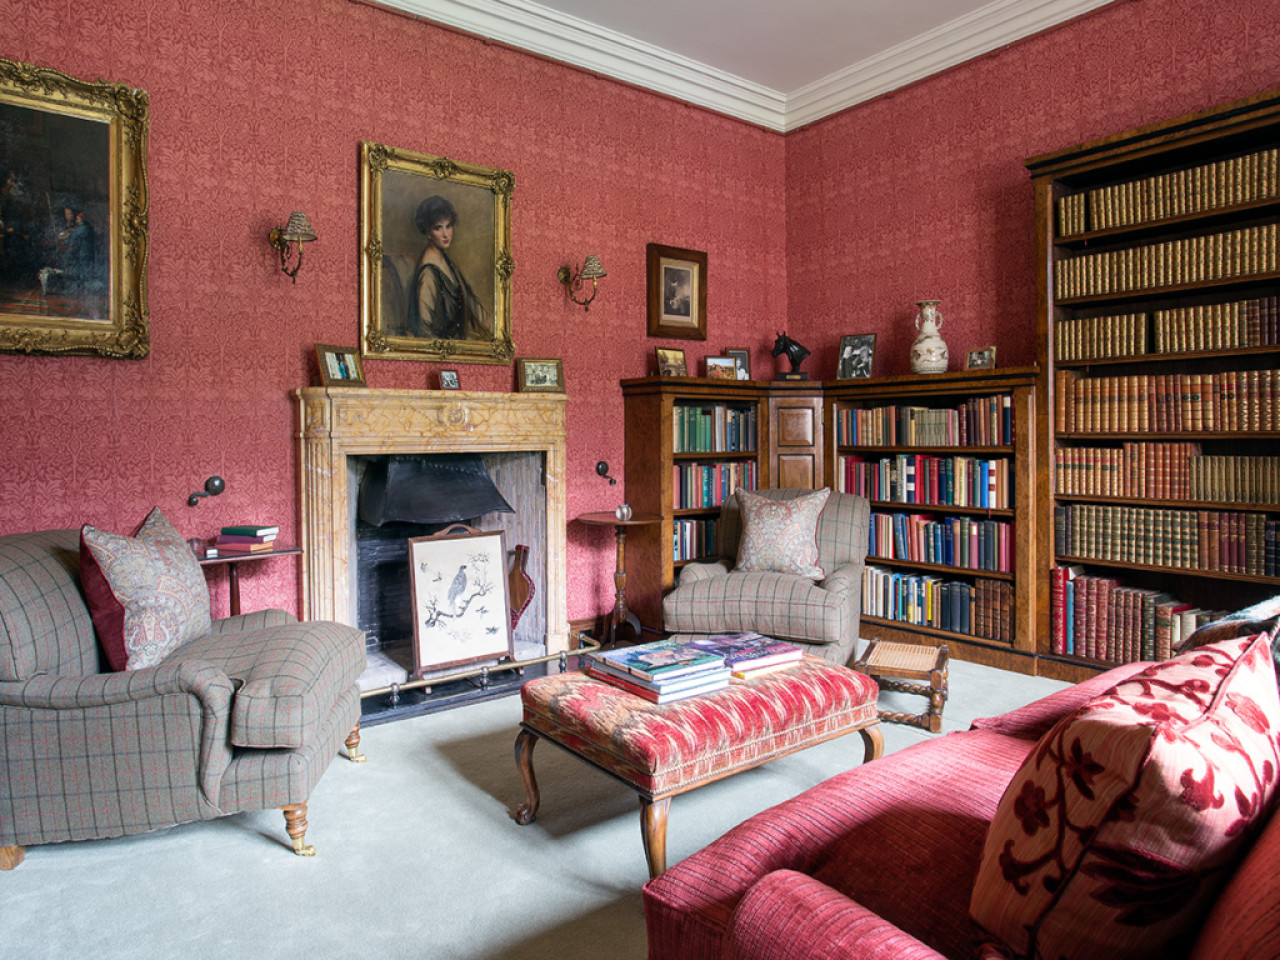 Stay at Abbotsford, Reading Room